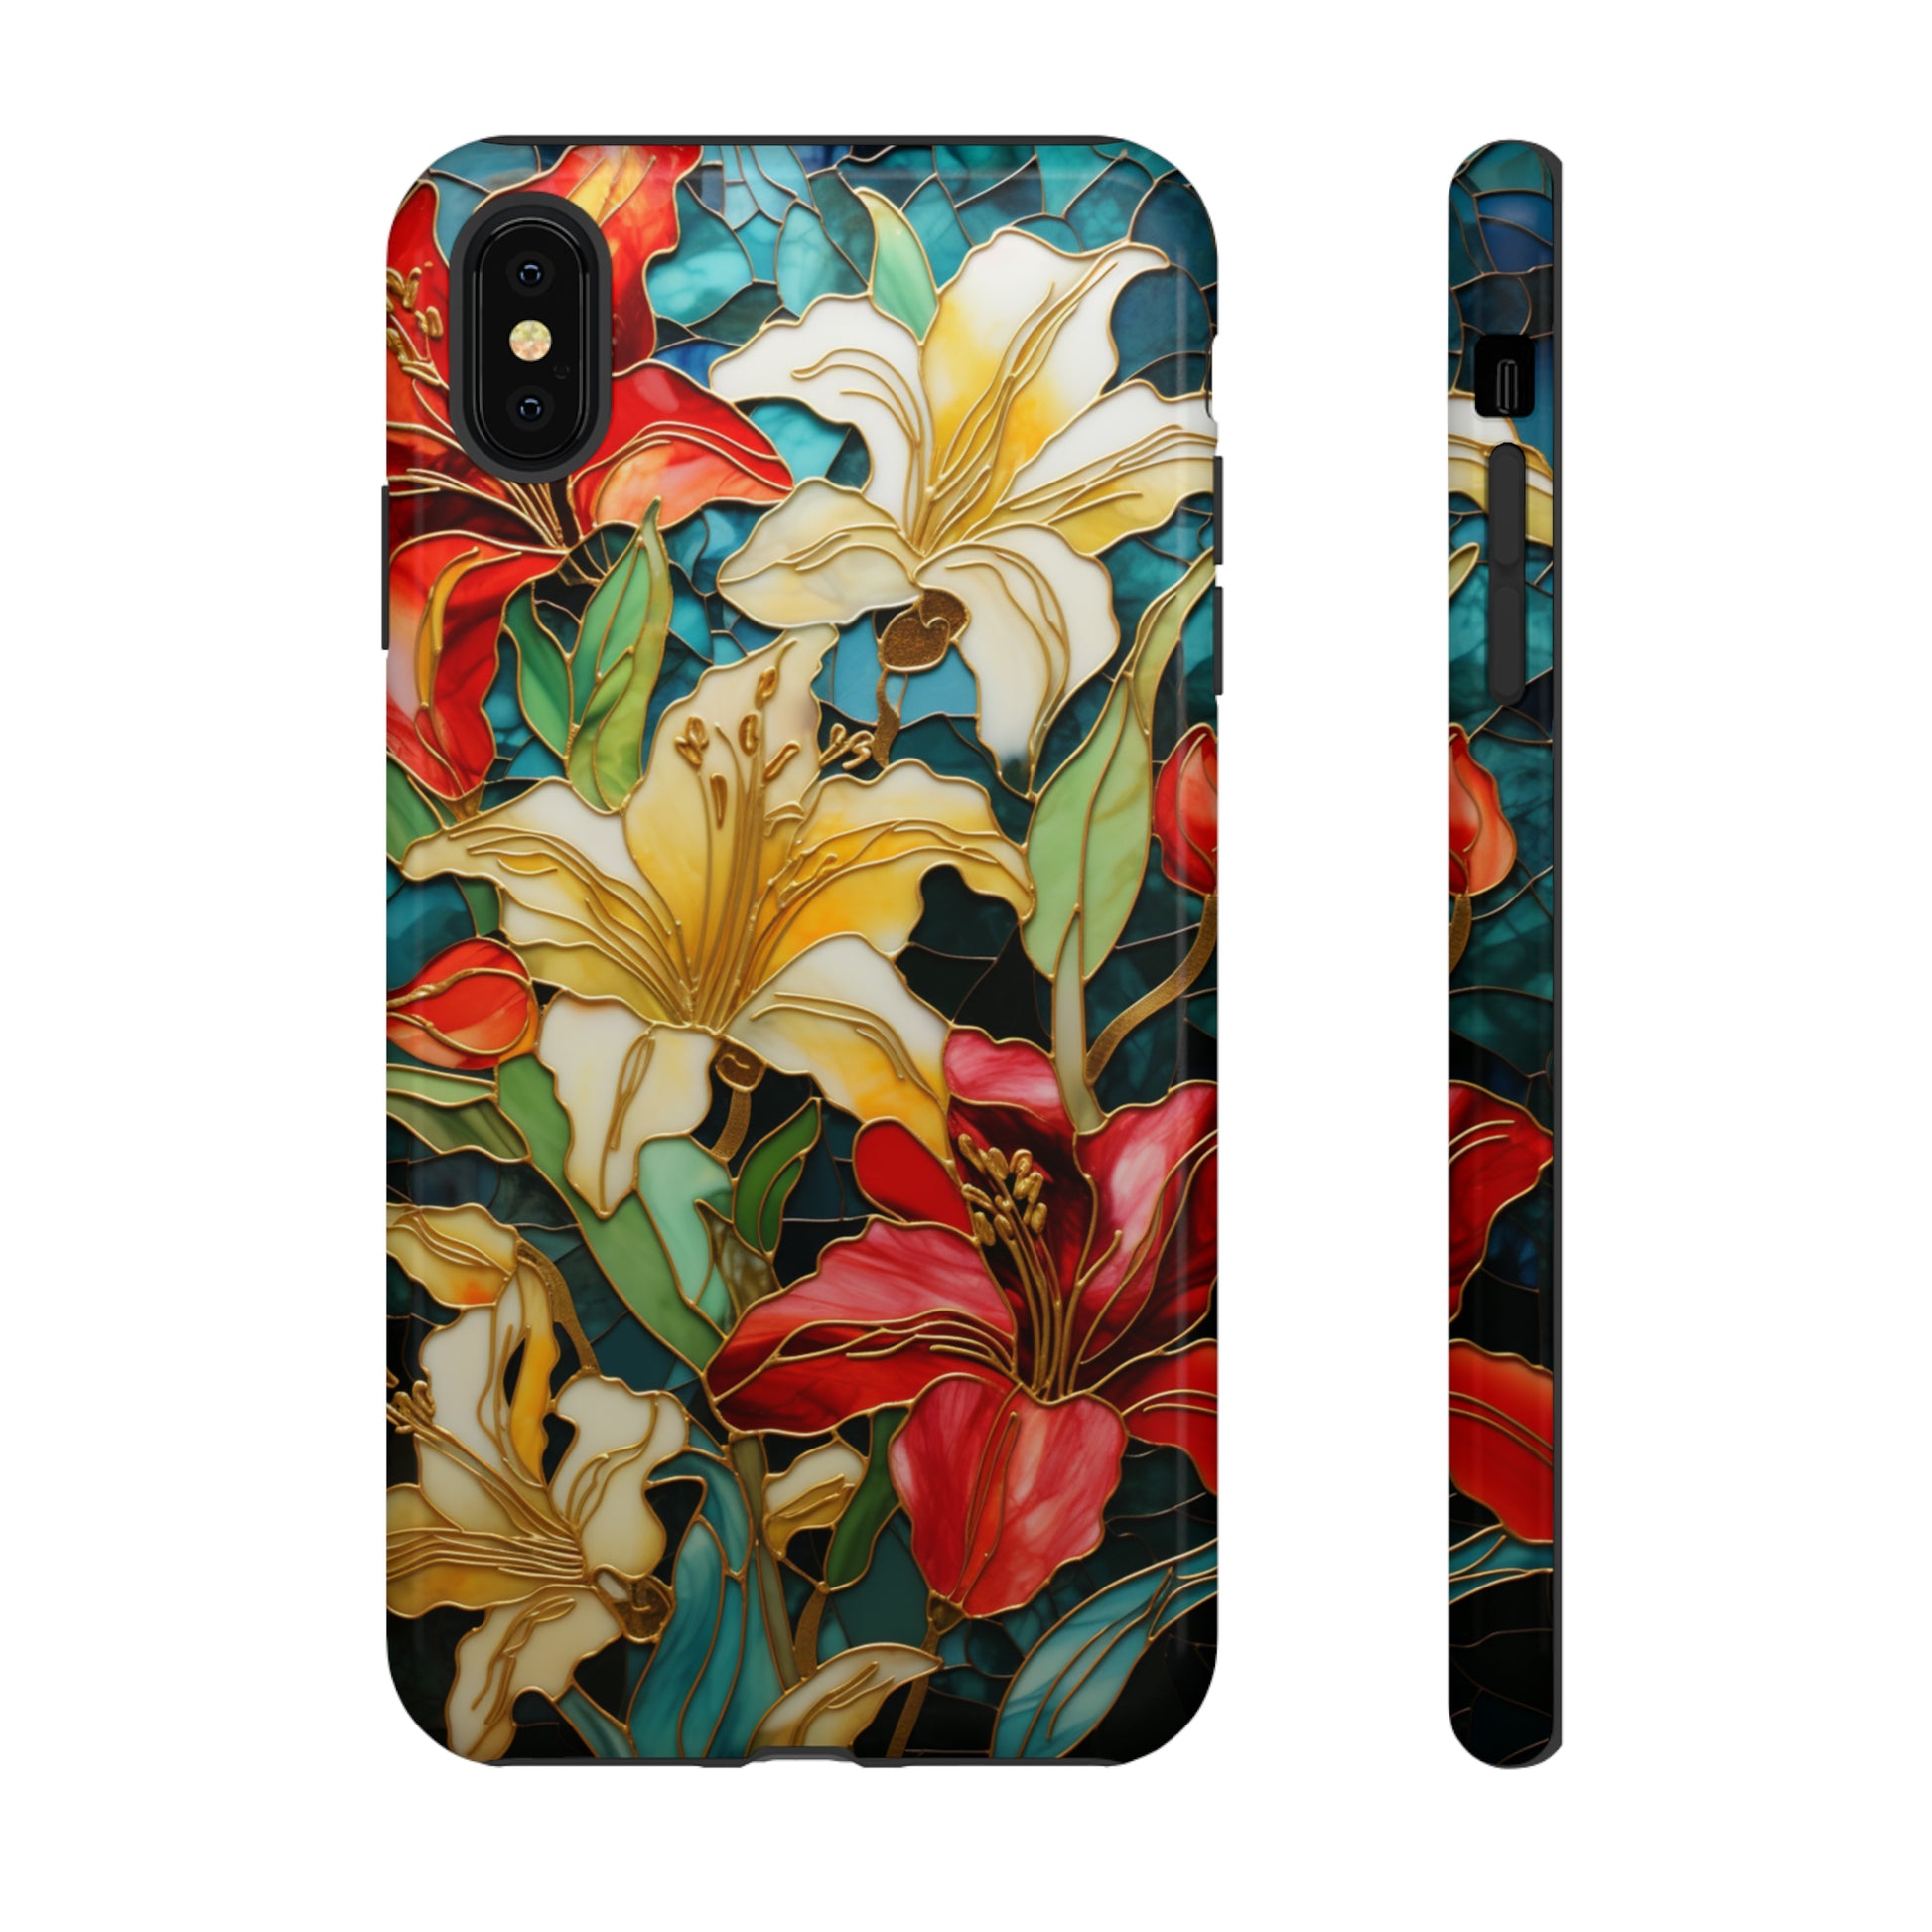 Luxurious lily design phone case for Google Pixel